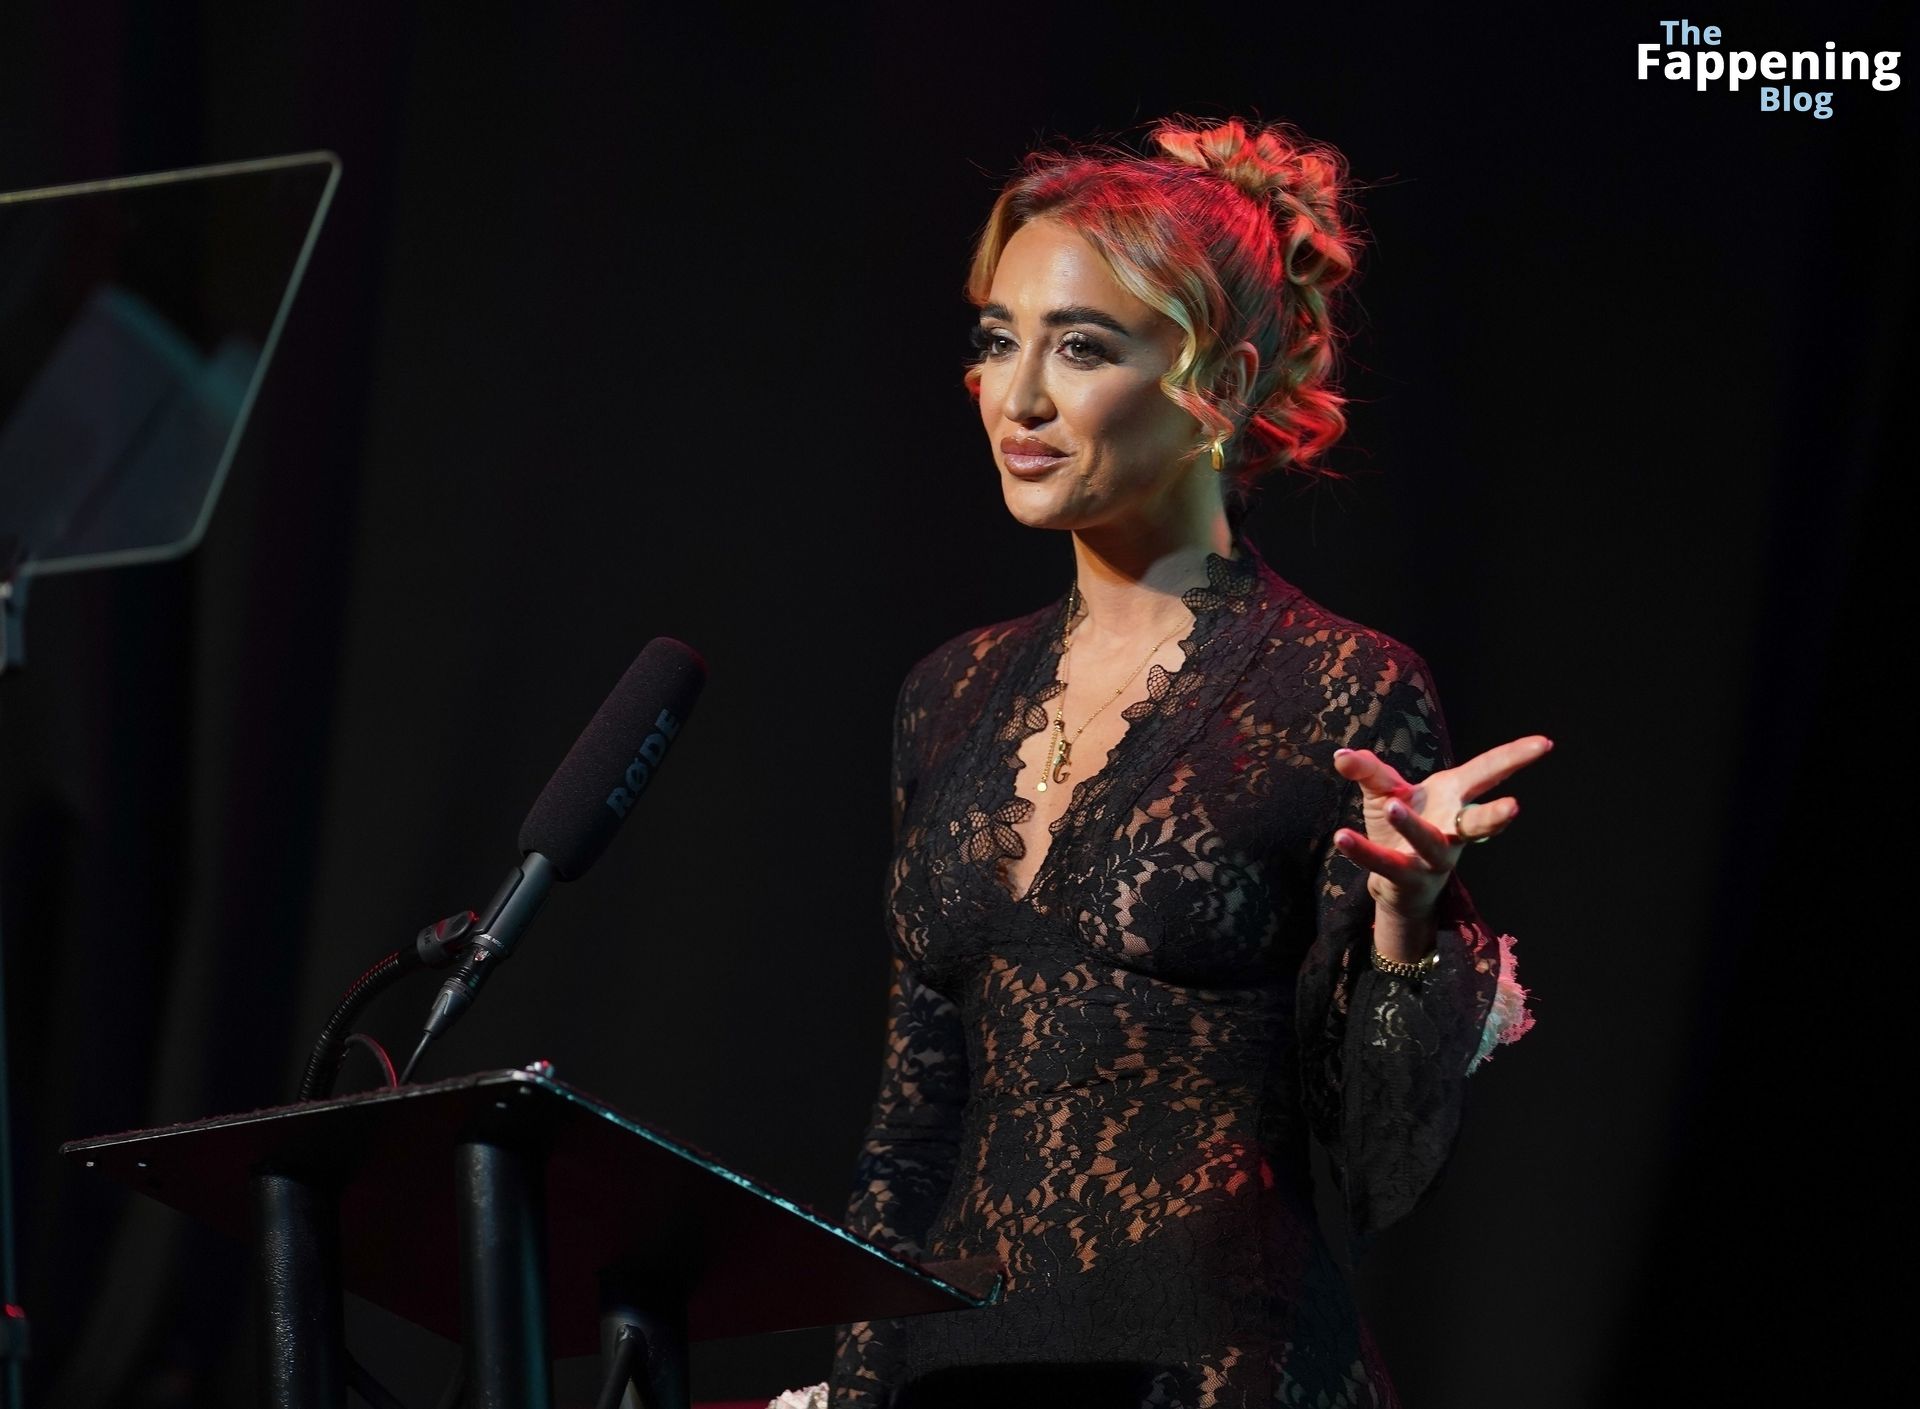 Georgia Harrison Displays Her Nude Tits Wearing a See-Through Lace Dress to Present Awards in Newcastle (48 Photos)